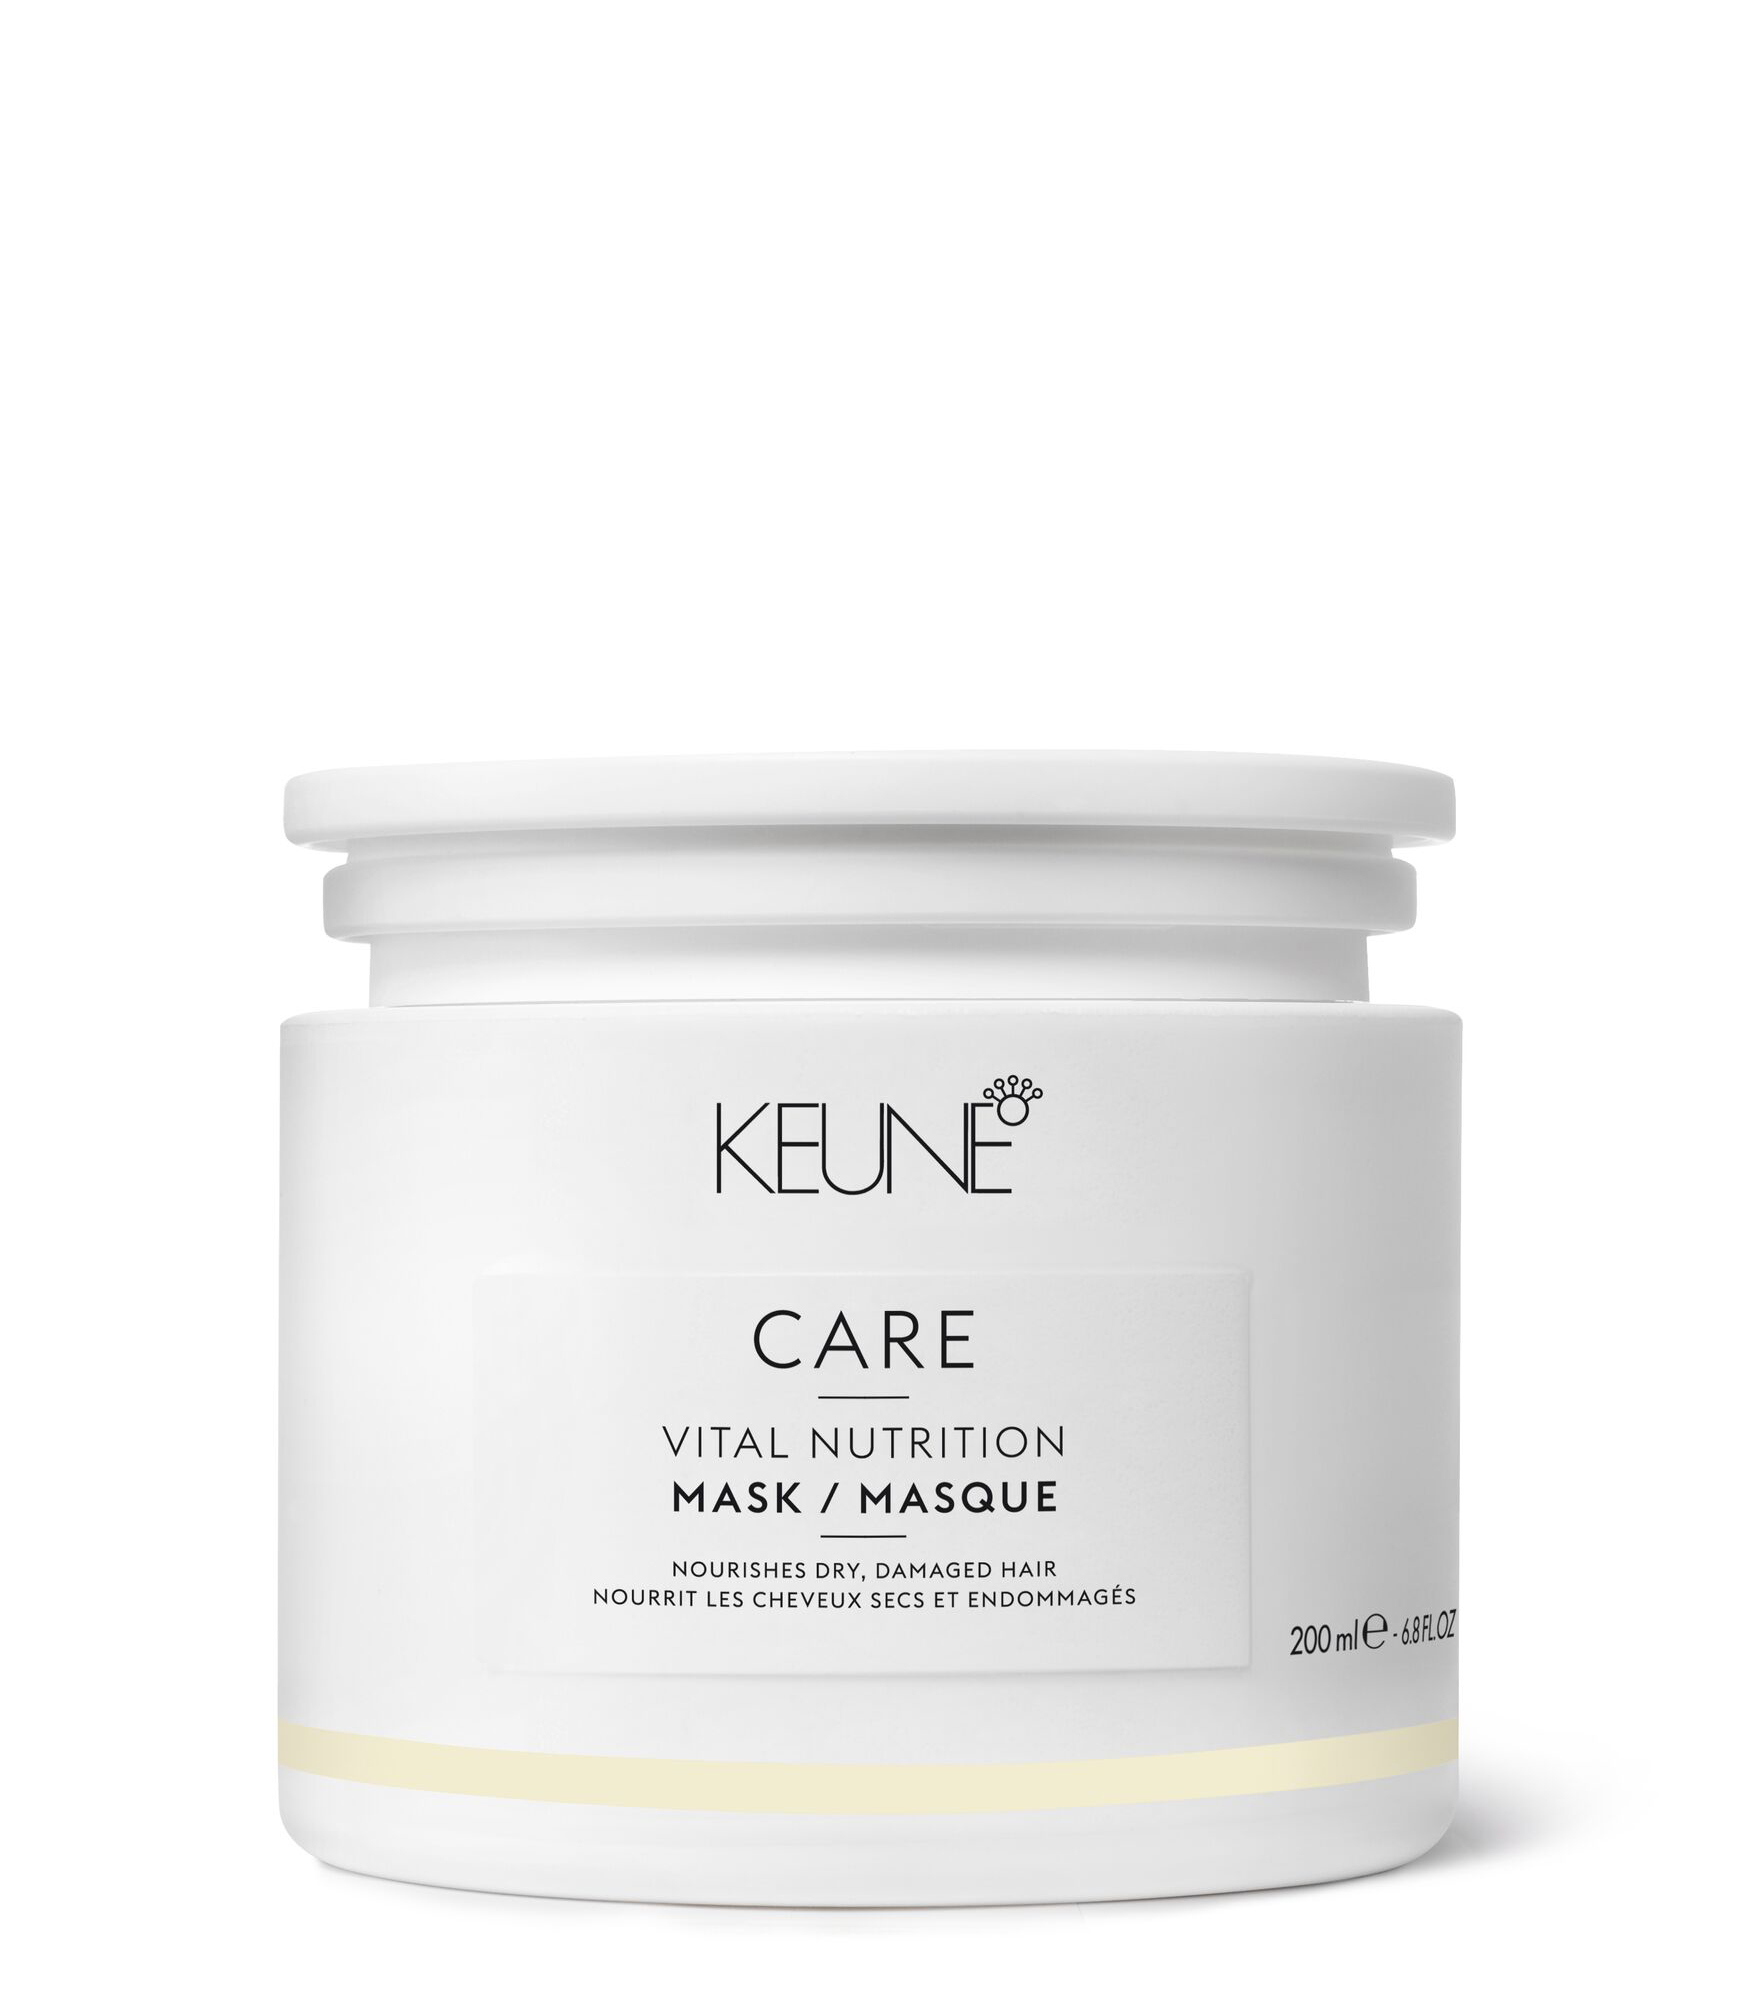 Vital Nutrition Mask improves elasticity, smooths damaged hair, strengthens, and adds shine. Perfect for dry hair. On keune.ch